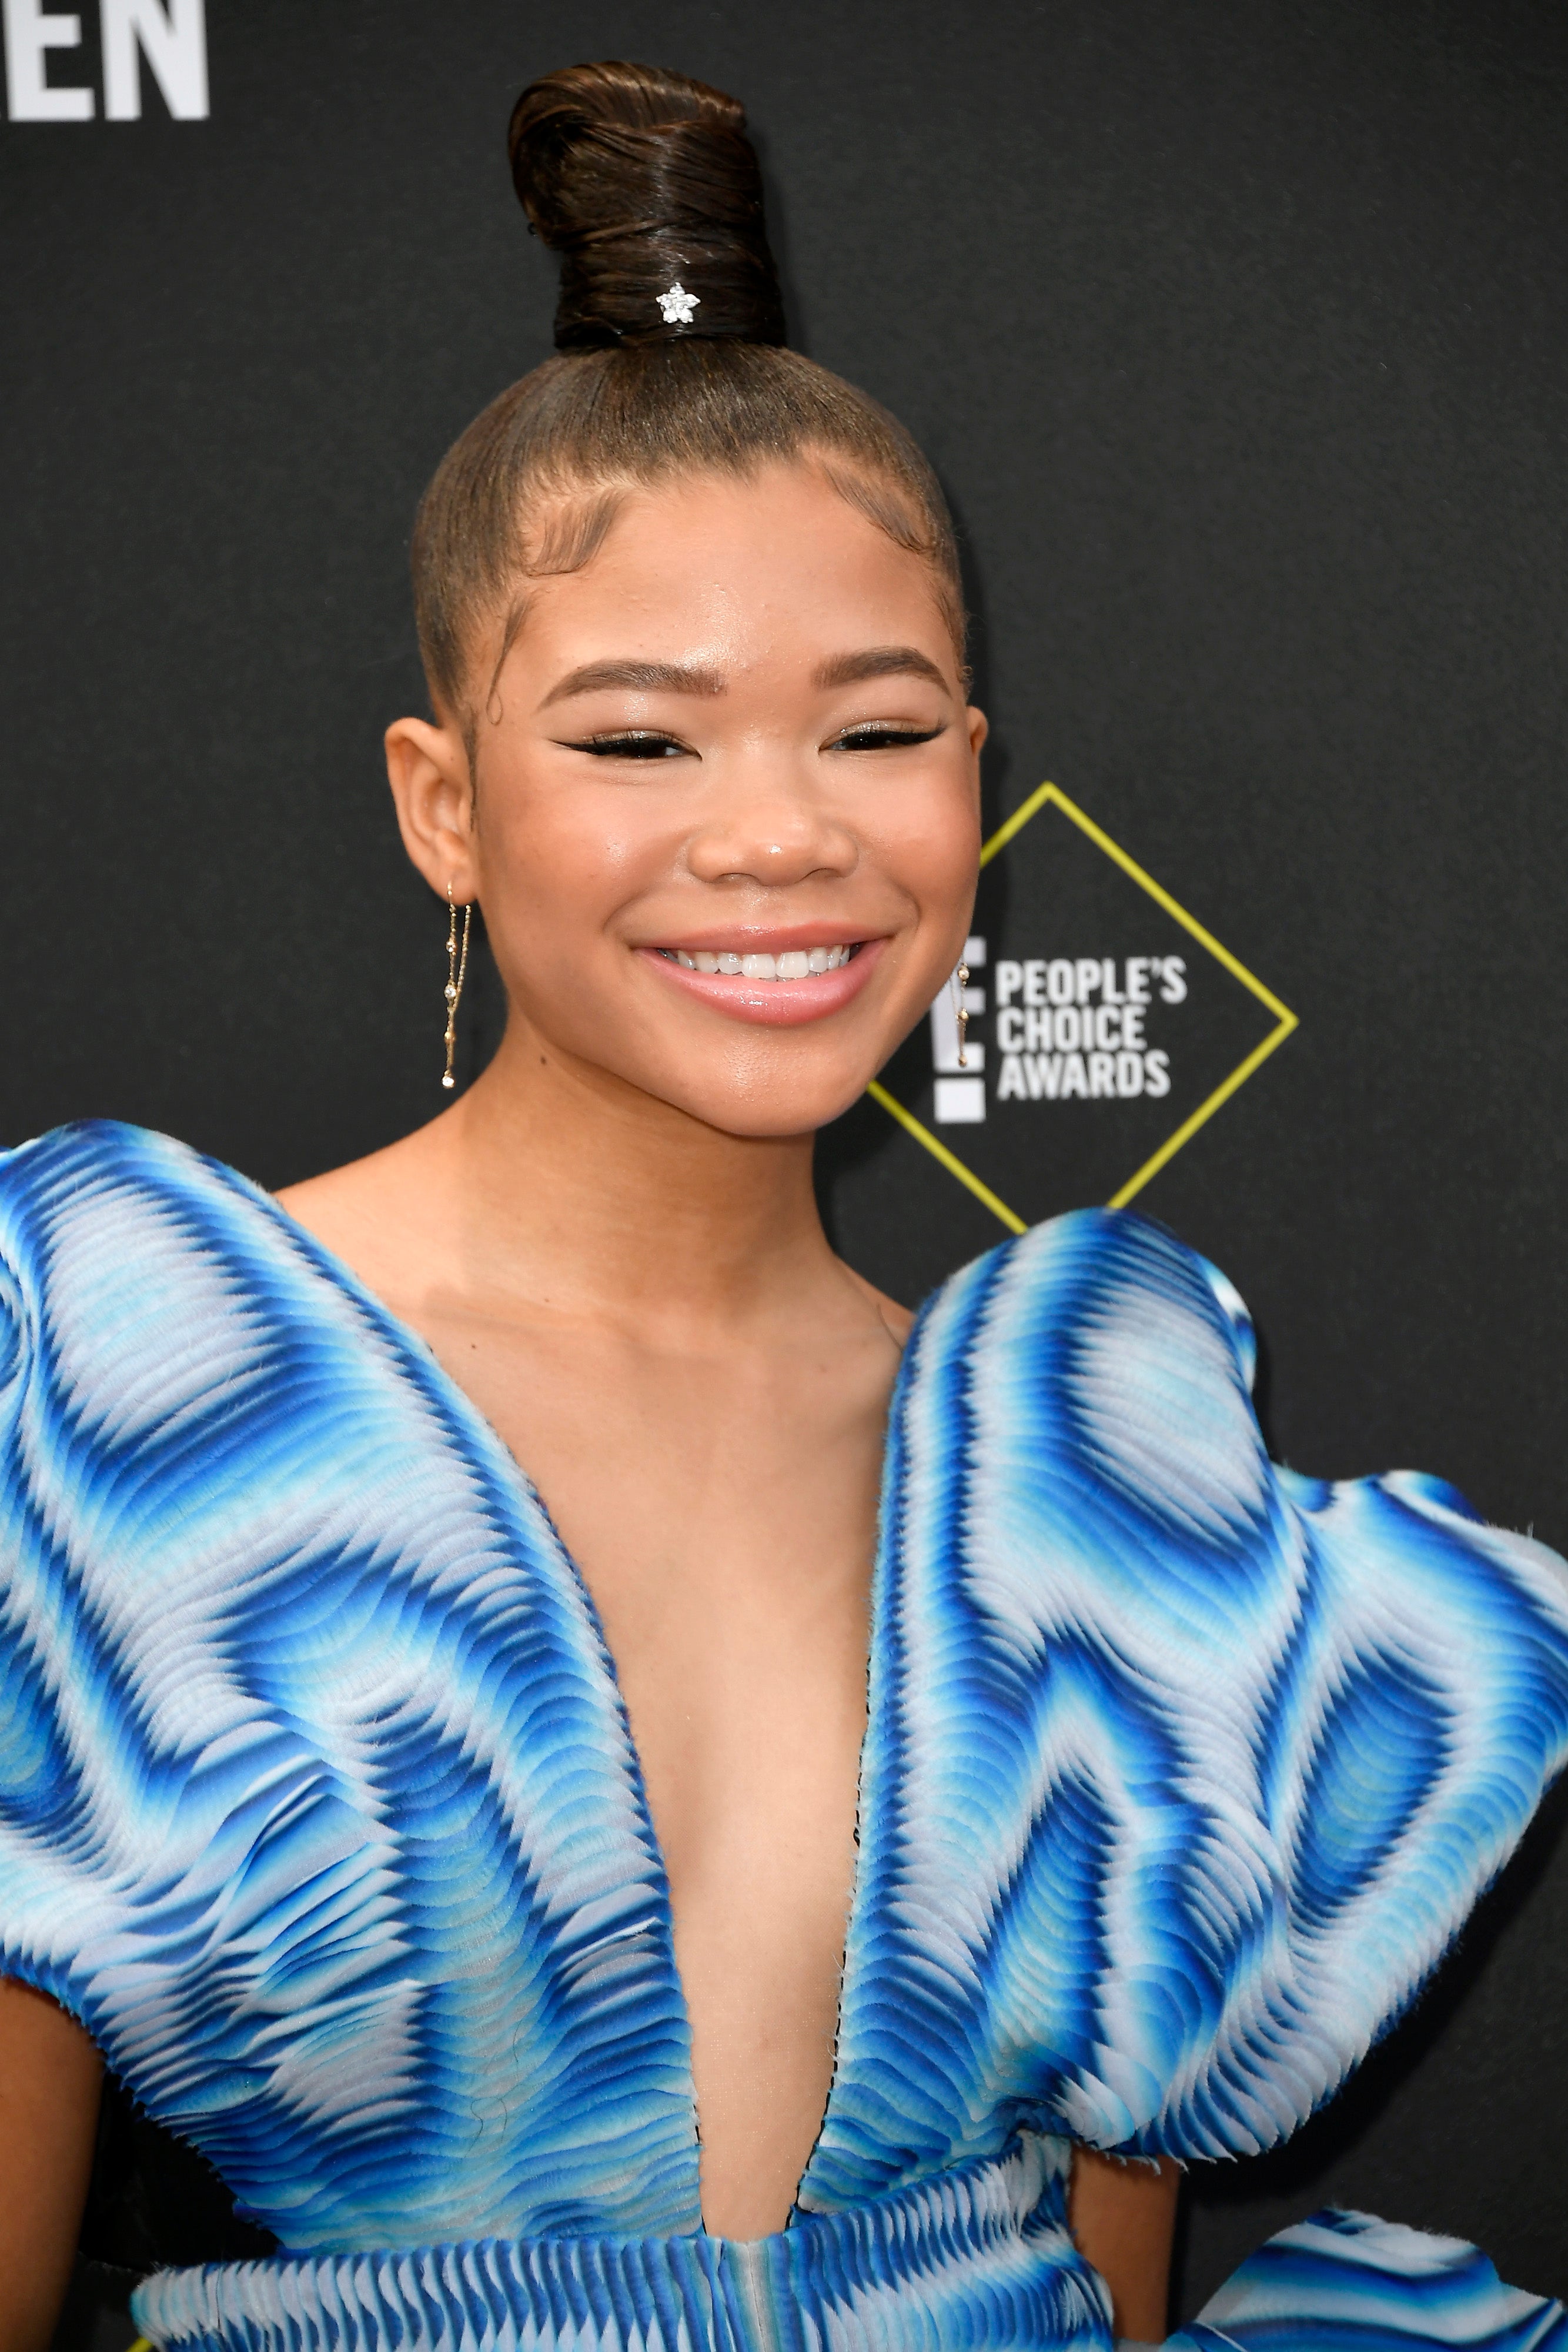 Celebrity Red Carpet Beauty From The 2019 E! People's Choice Awards